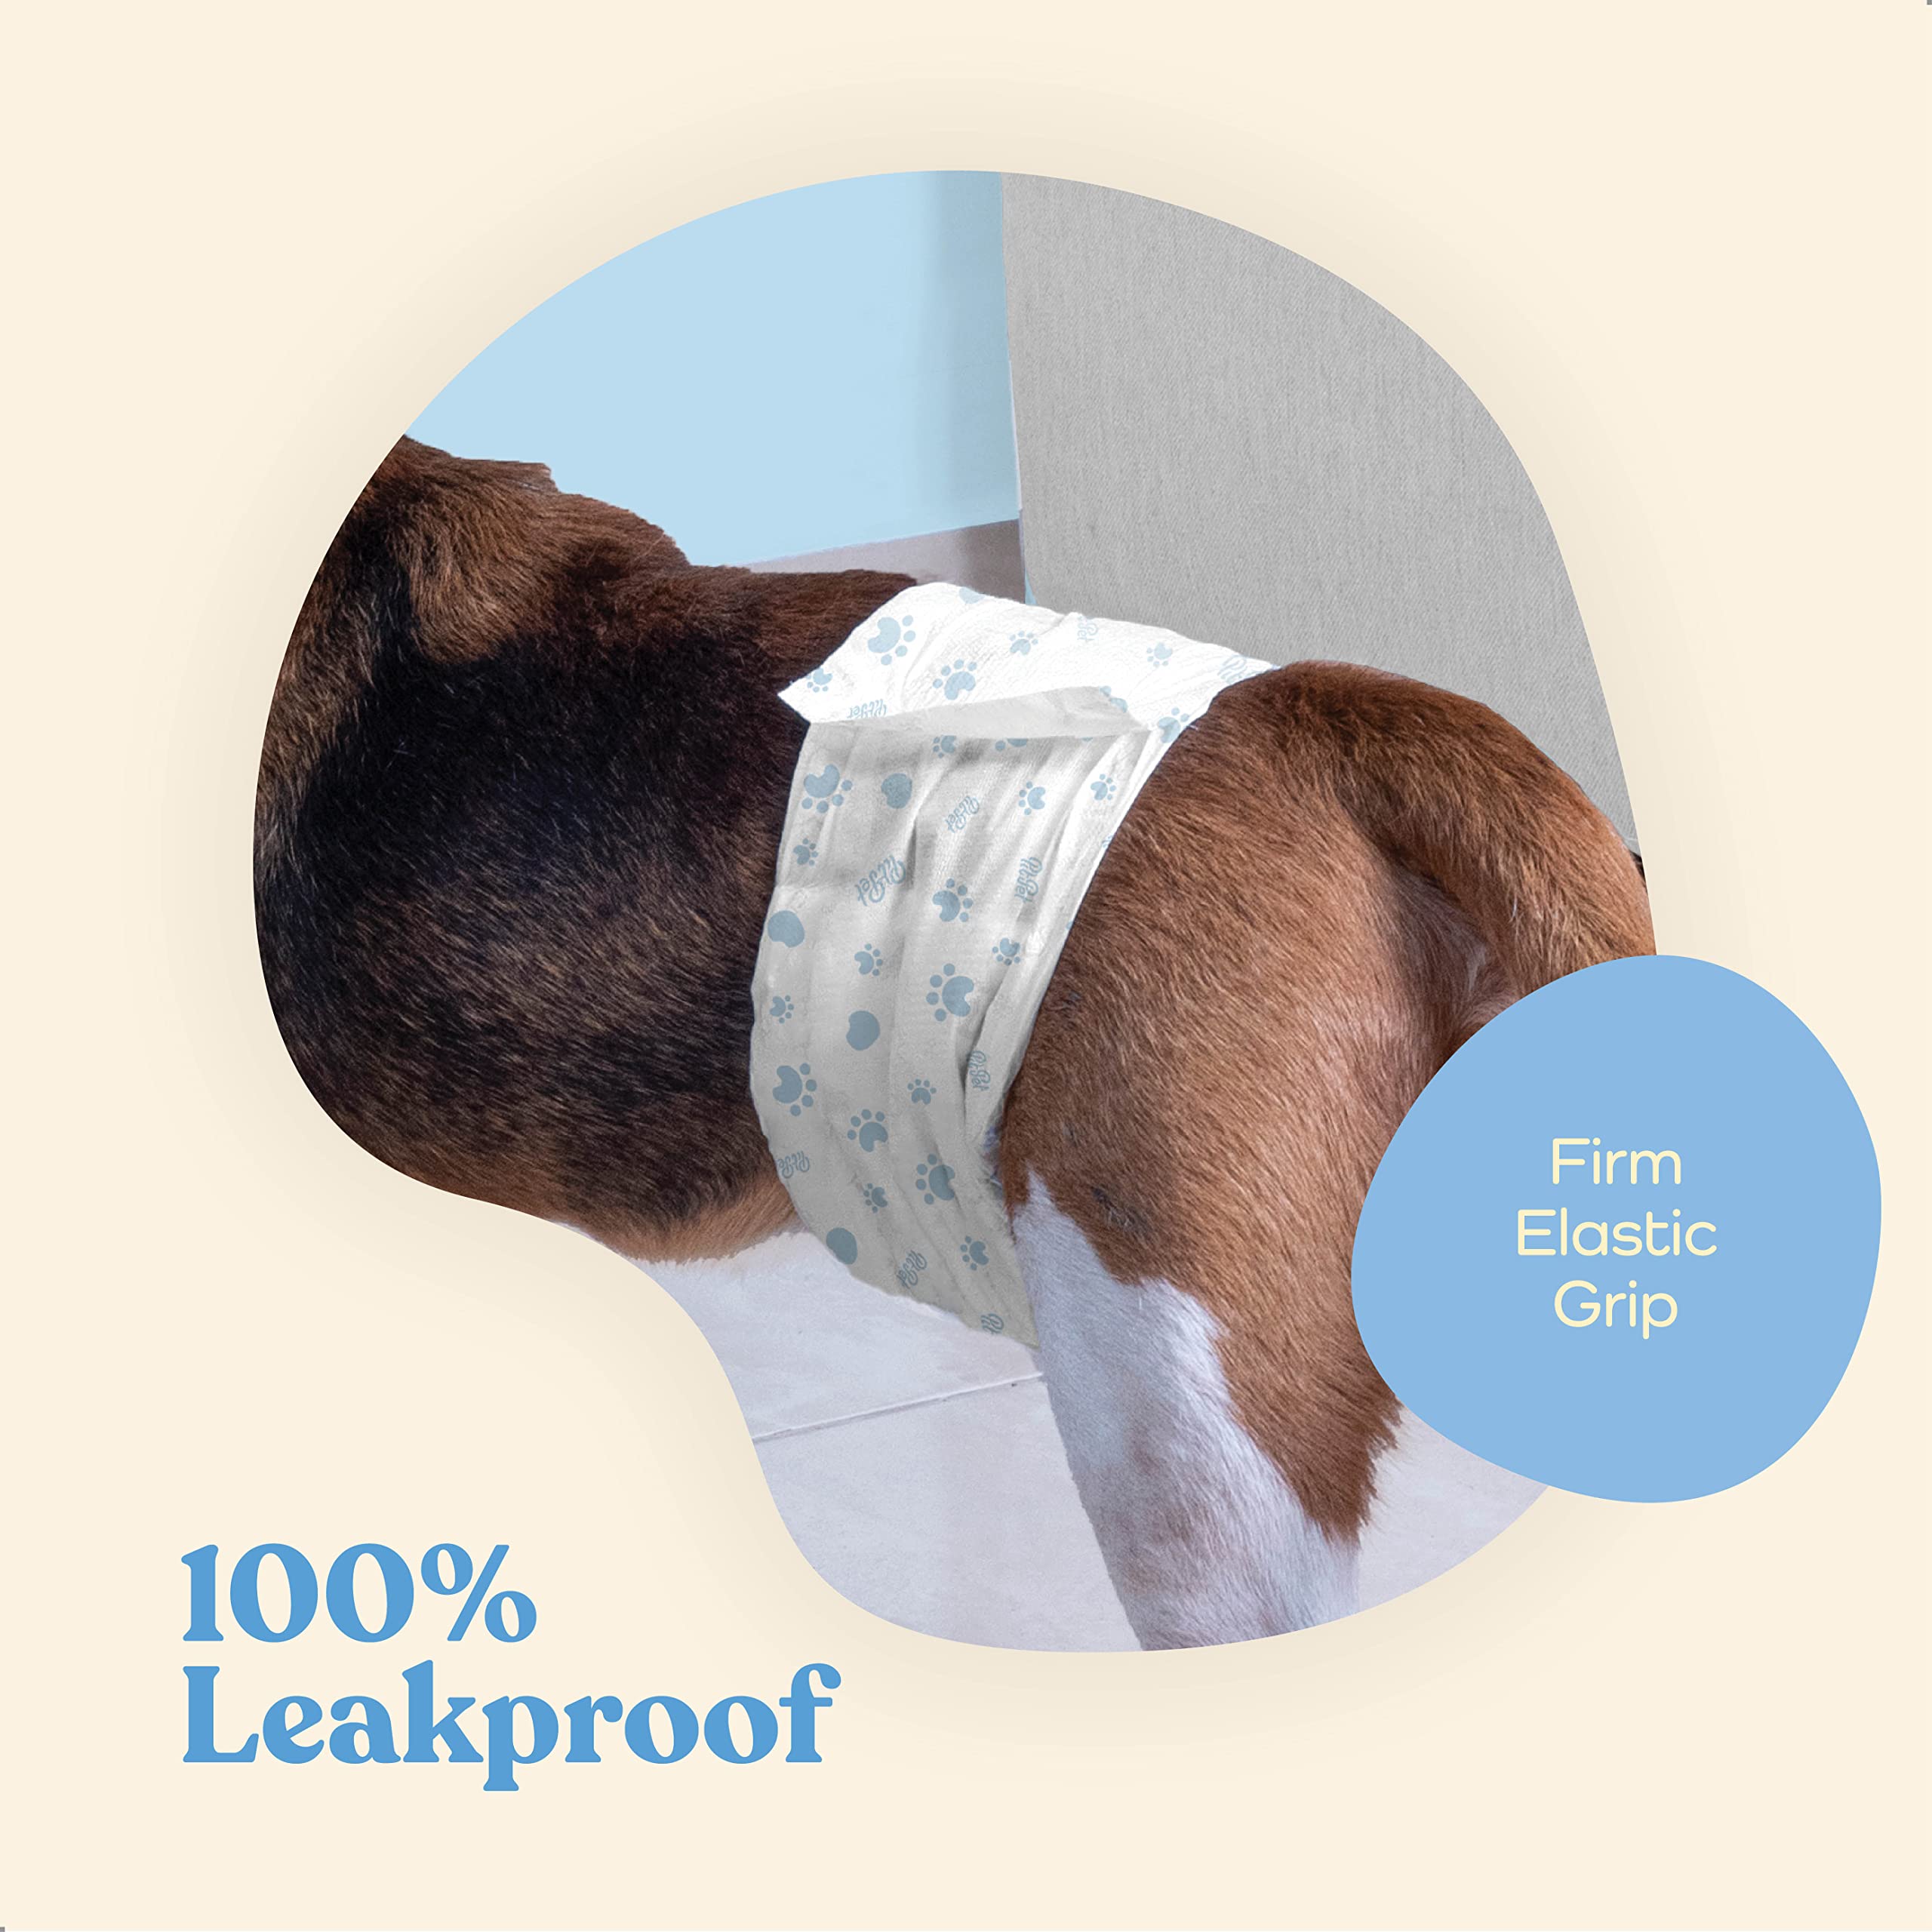 Comfortable Male Dog Diapers - Super Absorbent Disposable Male Dog Wraps- FlashDry Gel Technology, Wetness Indicator Doggie Diapers- Leakproof Belly Wraps for Incontinence, Excitable Urination  - Like New